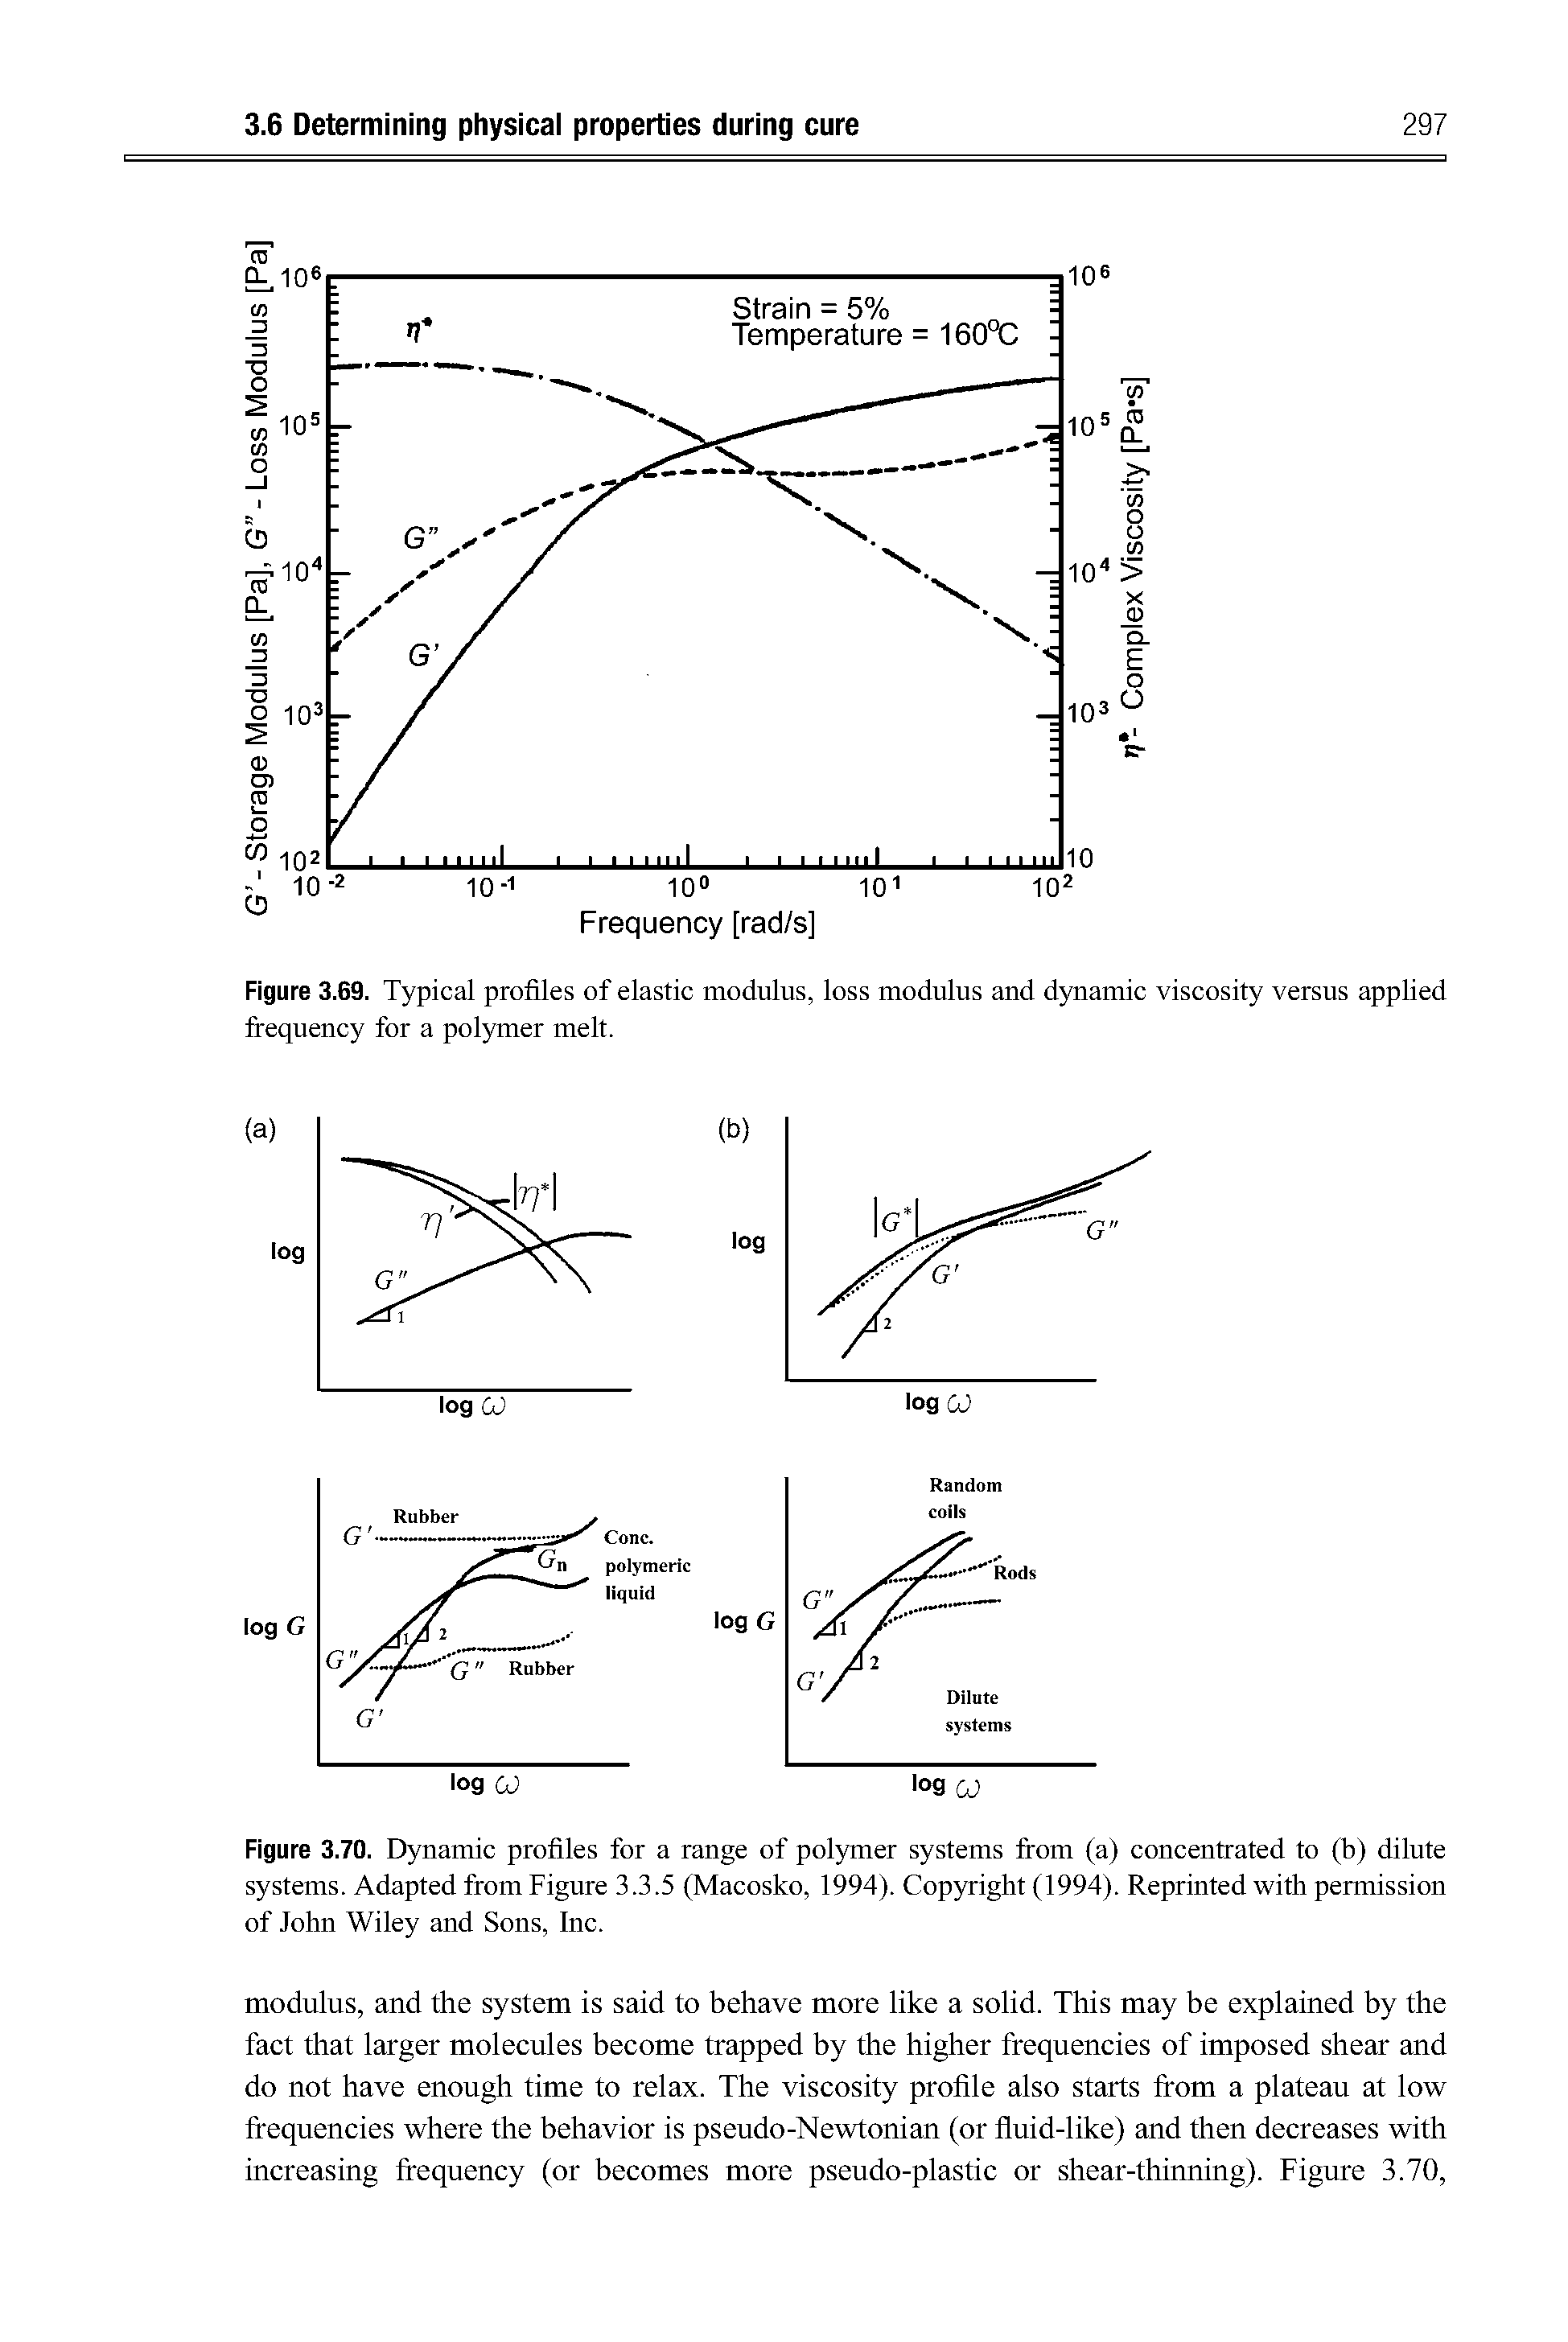 Figure 3.70. Dynamic profiles for a range of polymer systems from (a) concentrated to (b) dilute systems. Adapted from Figure 3.3.5 (Macosko, 1994). Copyright (1994). Reprinted with permission of John Wiley and Sons, Inc.